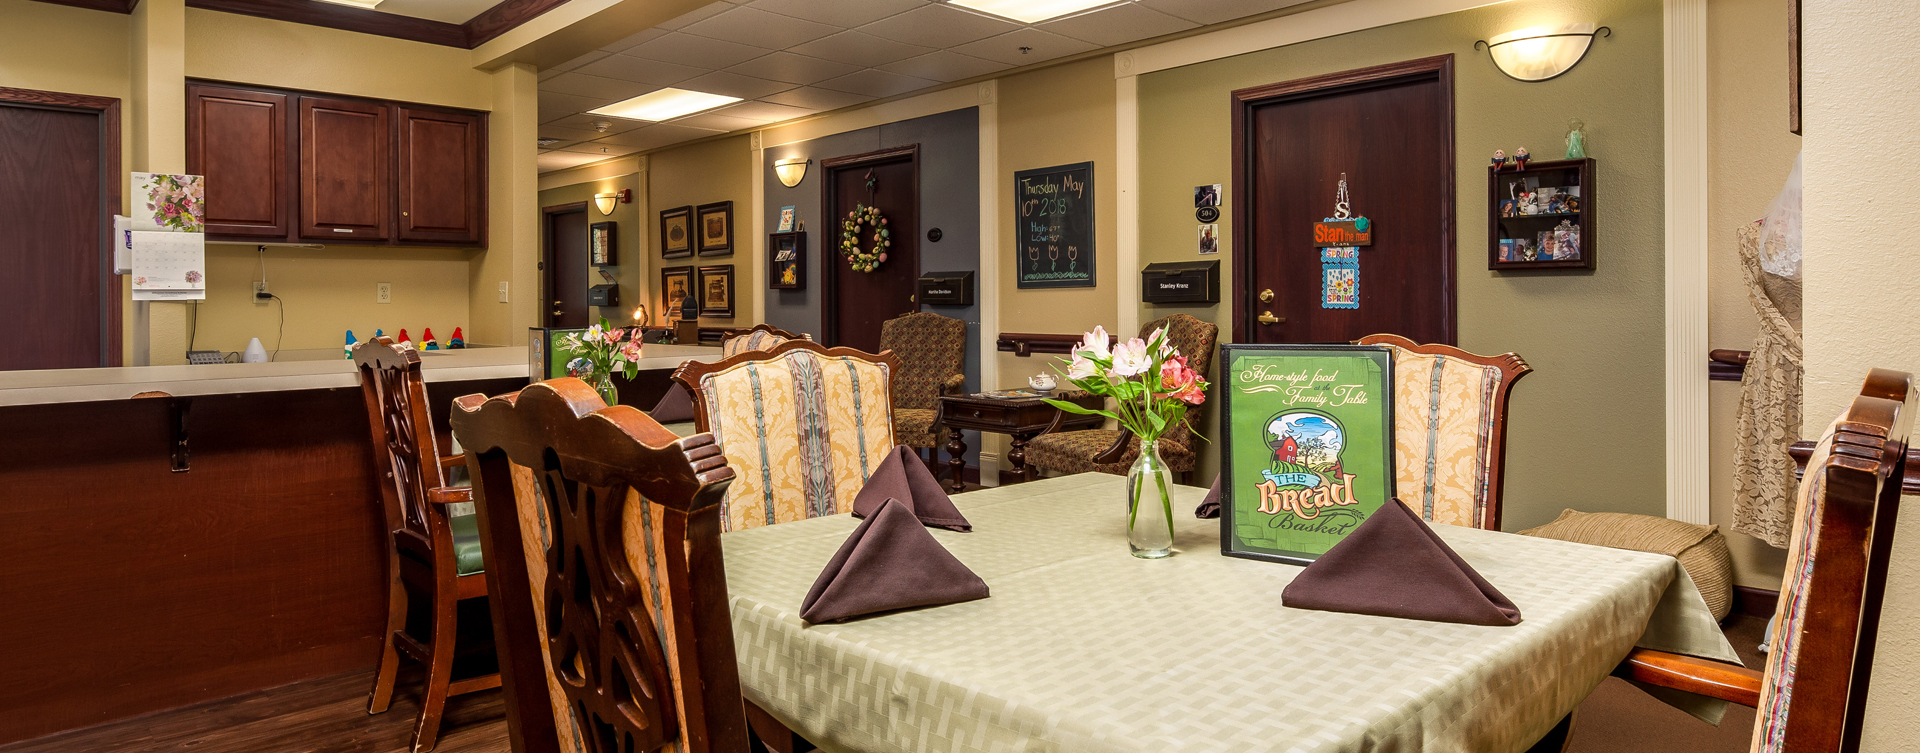 Mary B’s country kitchen evokes a sense of home and reconnects residents to past life skills at Bickford of Okemos